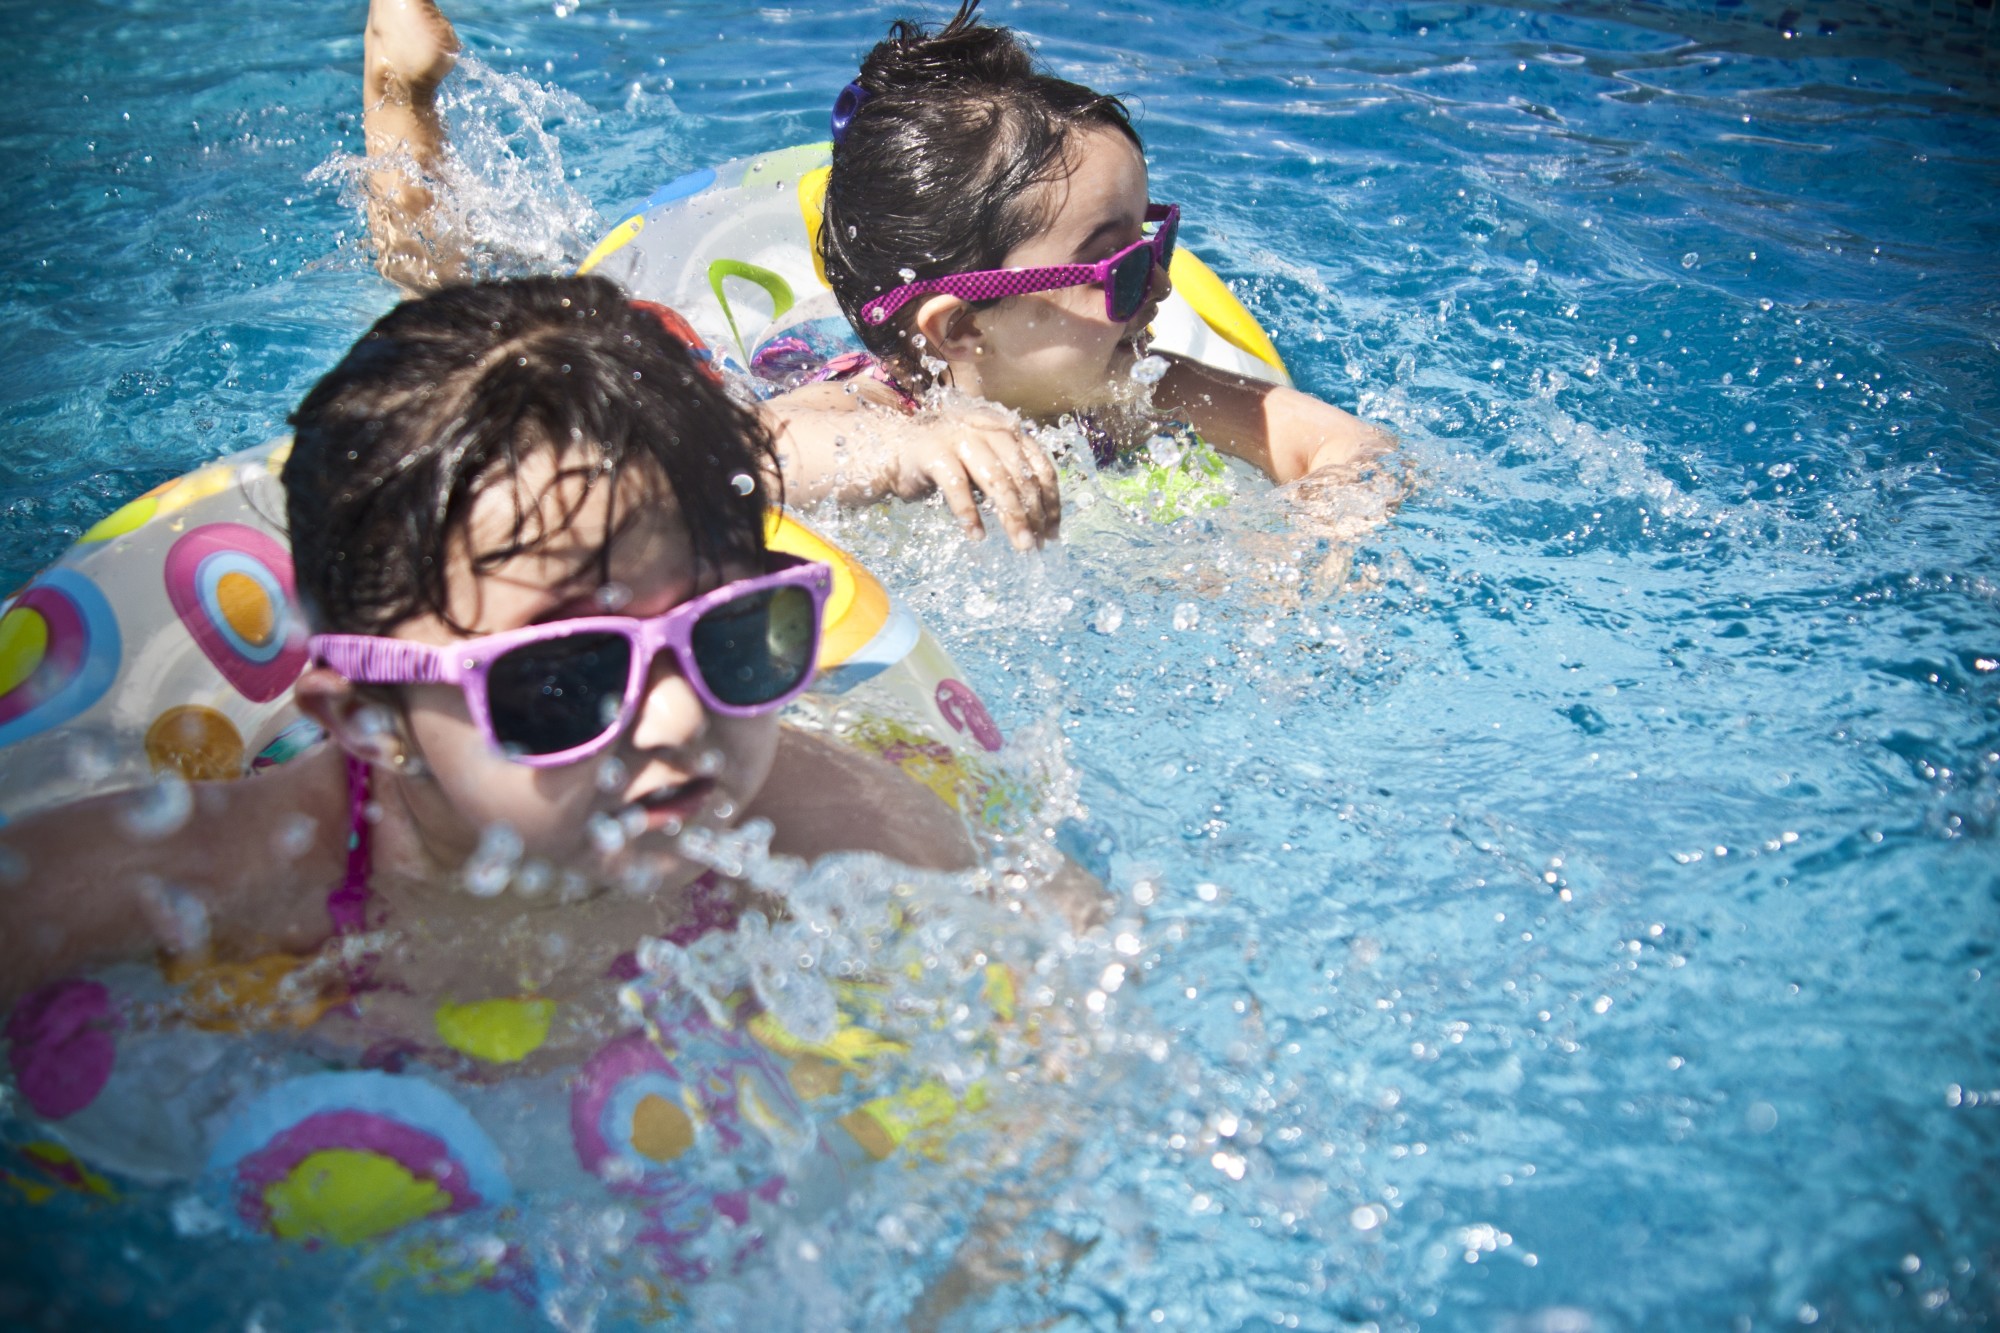 Swimming Safety Tips